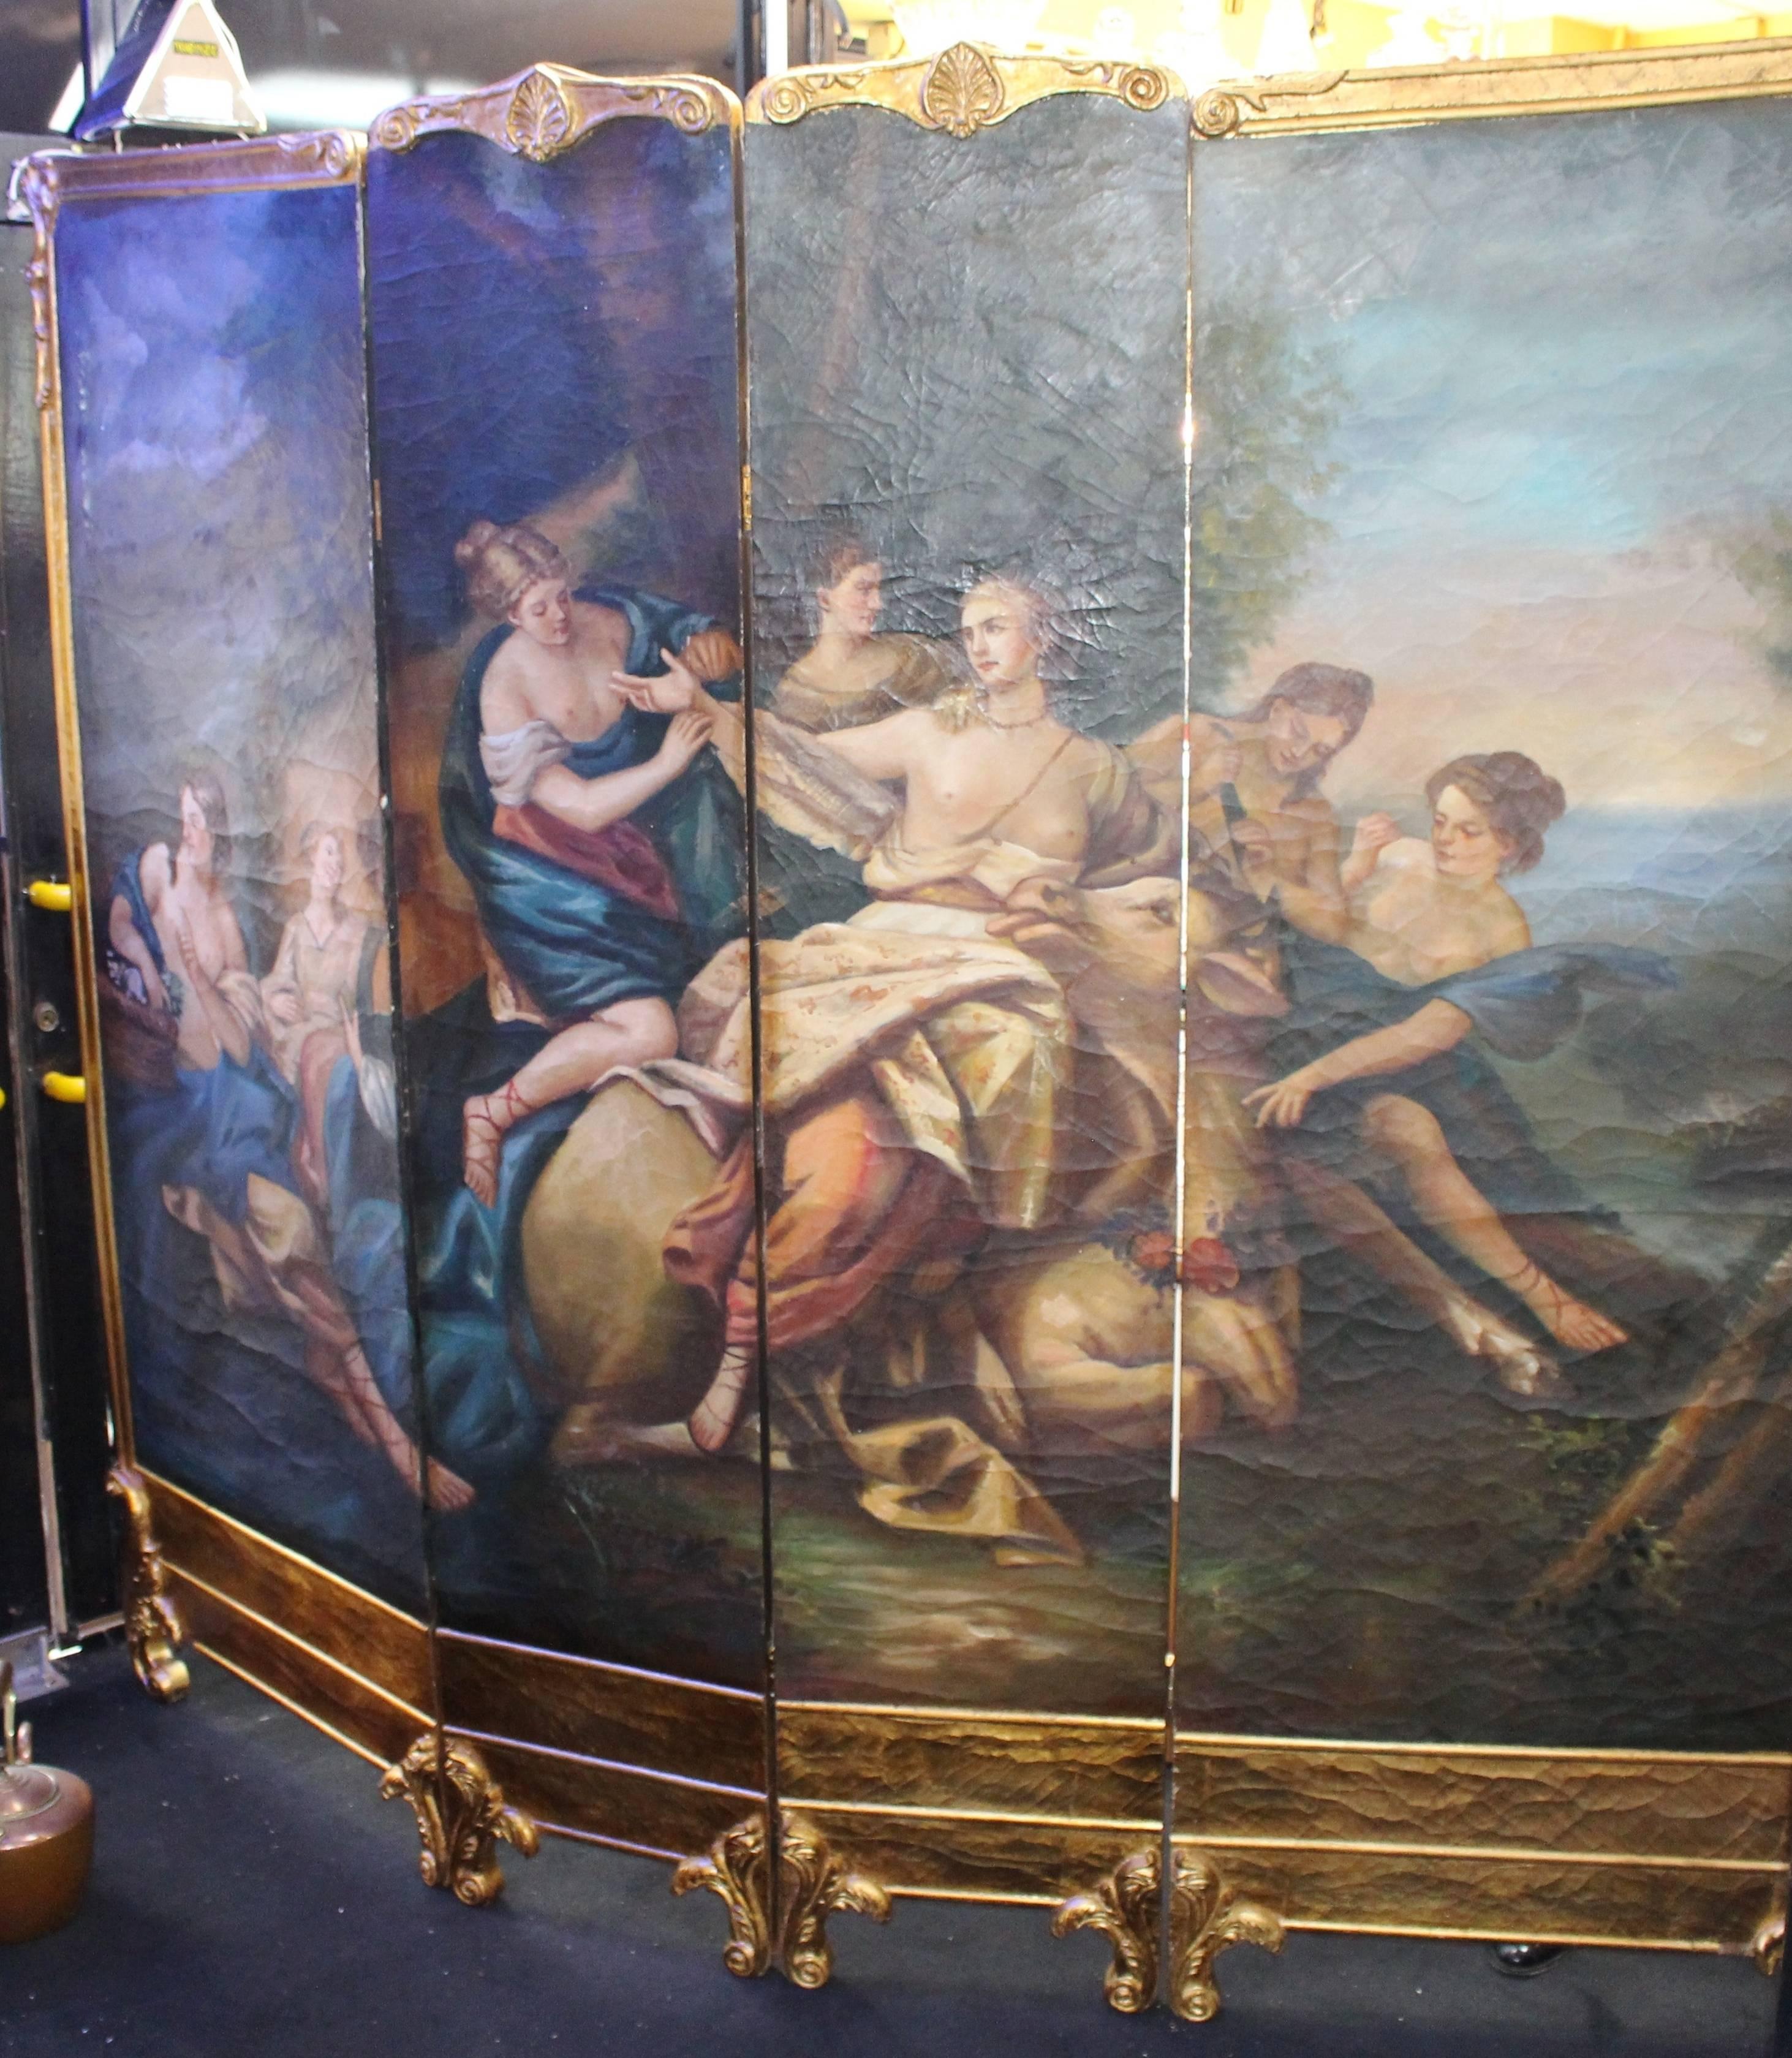 Measures: Width 239 cm 94 in
Height 209 82 1/4 in

Four fold screen
Decoration hand-painted classical style scenes to the panels with gilt surround
Condition Good condition commensurate with age.

Fine handsome large classical style four fold